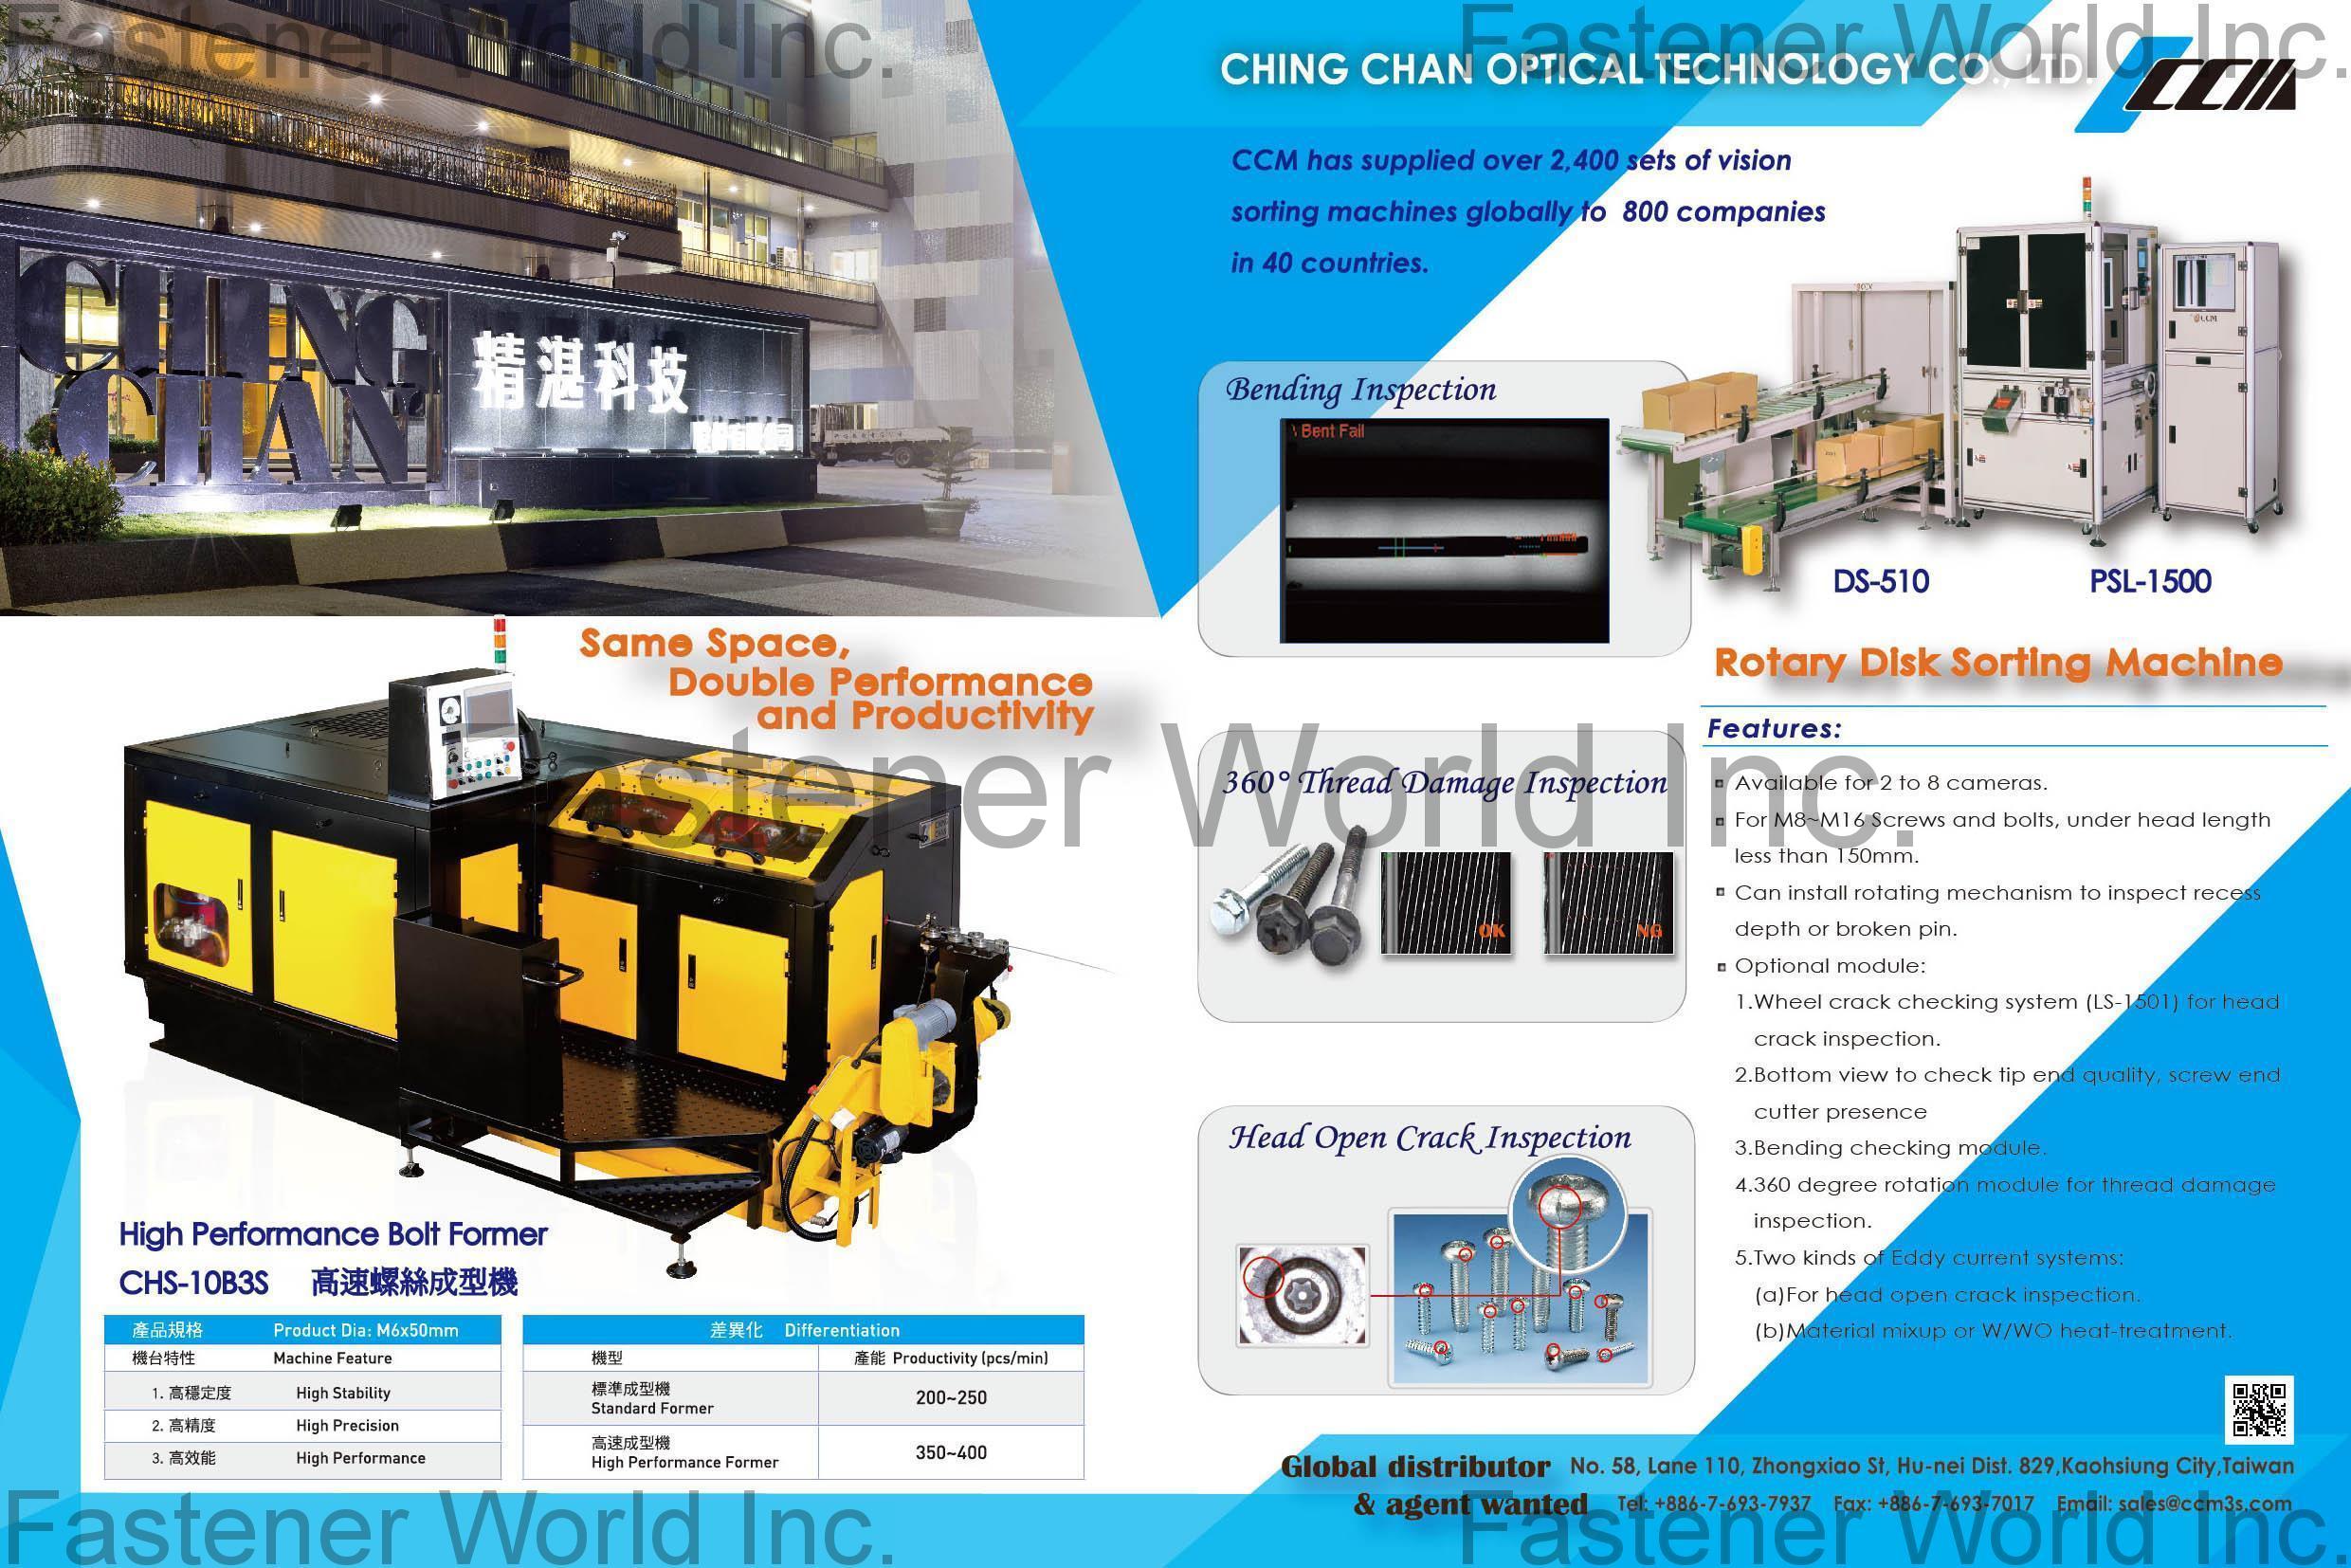 CHING CHAN OPTICAL TECHNOLOGY CO., LTD. (CCM) , High Performance Bolt Former, Rotary Disk Sorting Machine , Screw (Bolt) Formers